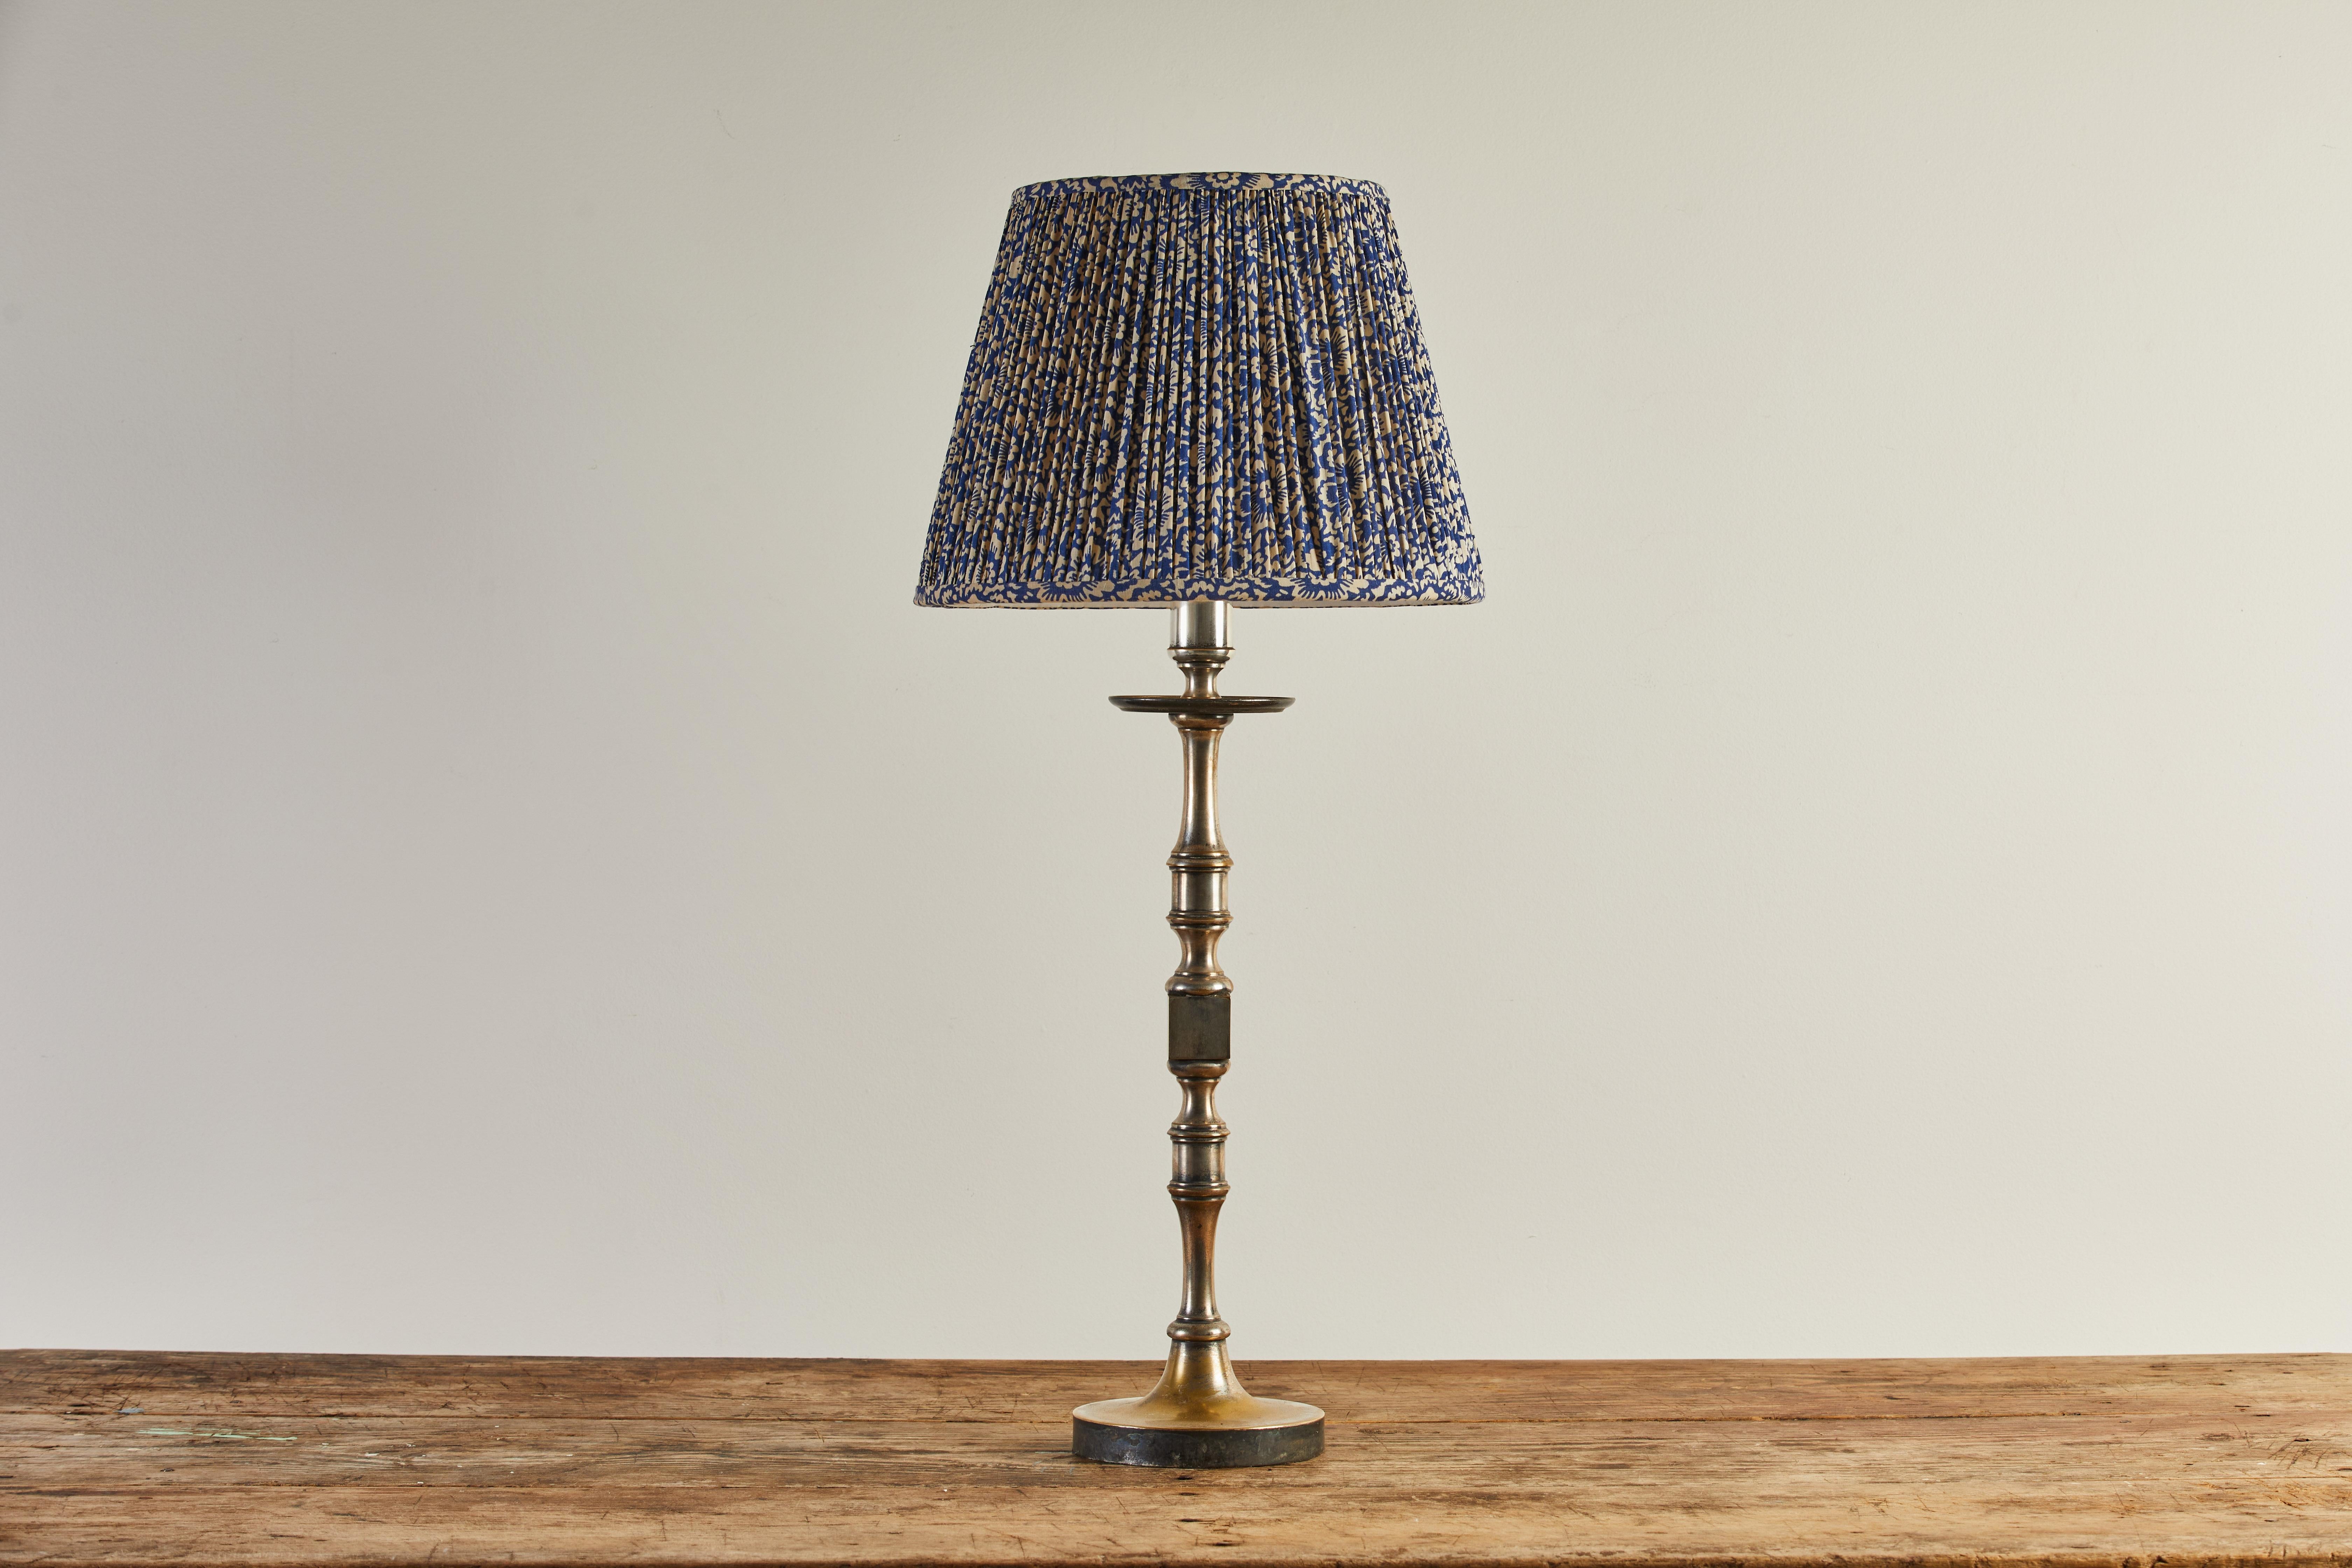 French turned silver table lamp with blue and white shirred floral lampshade. Please note, there is some patina and lustre to the silver finish.